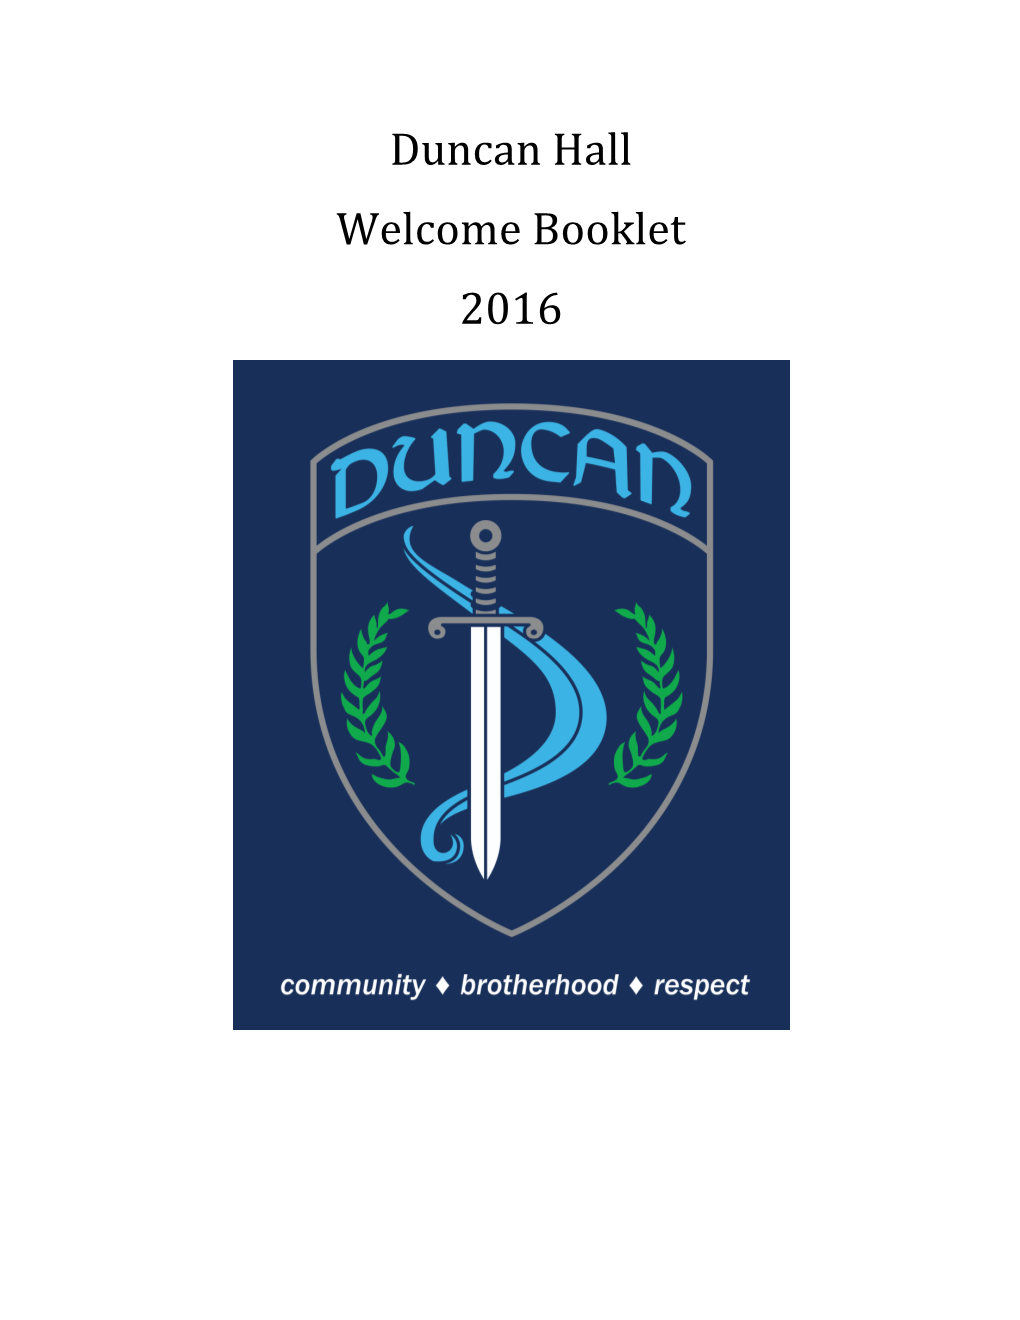 Duncan Hall Welcome Booklet 2016